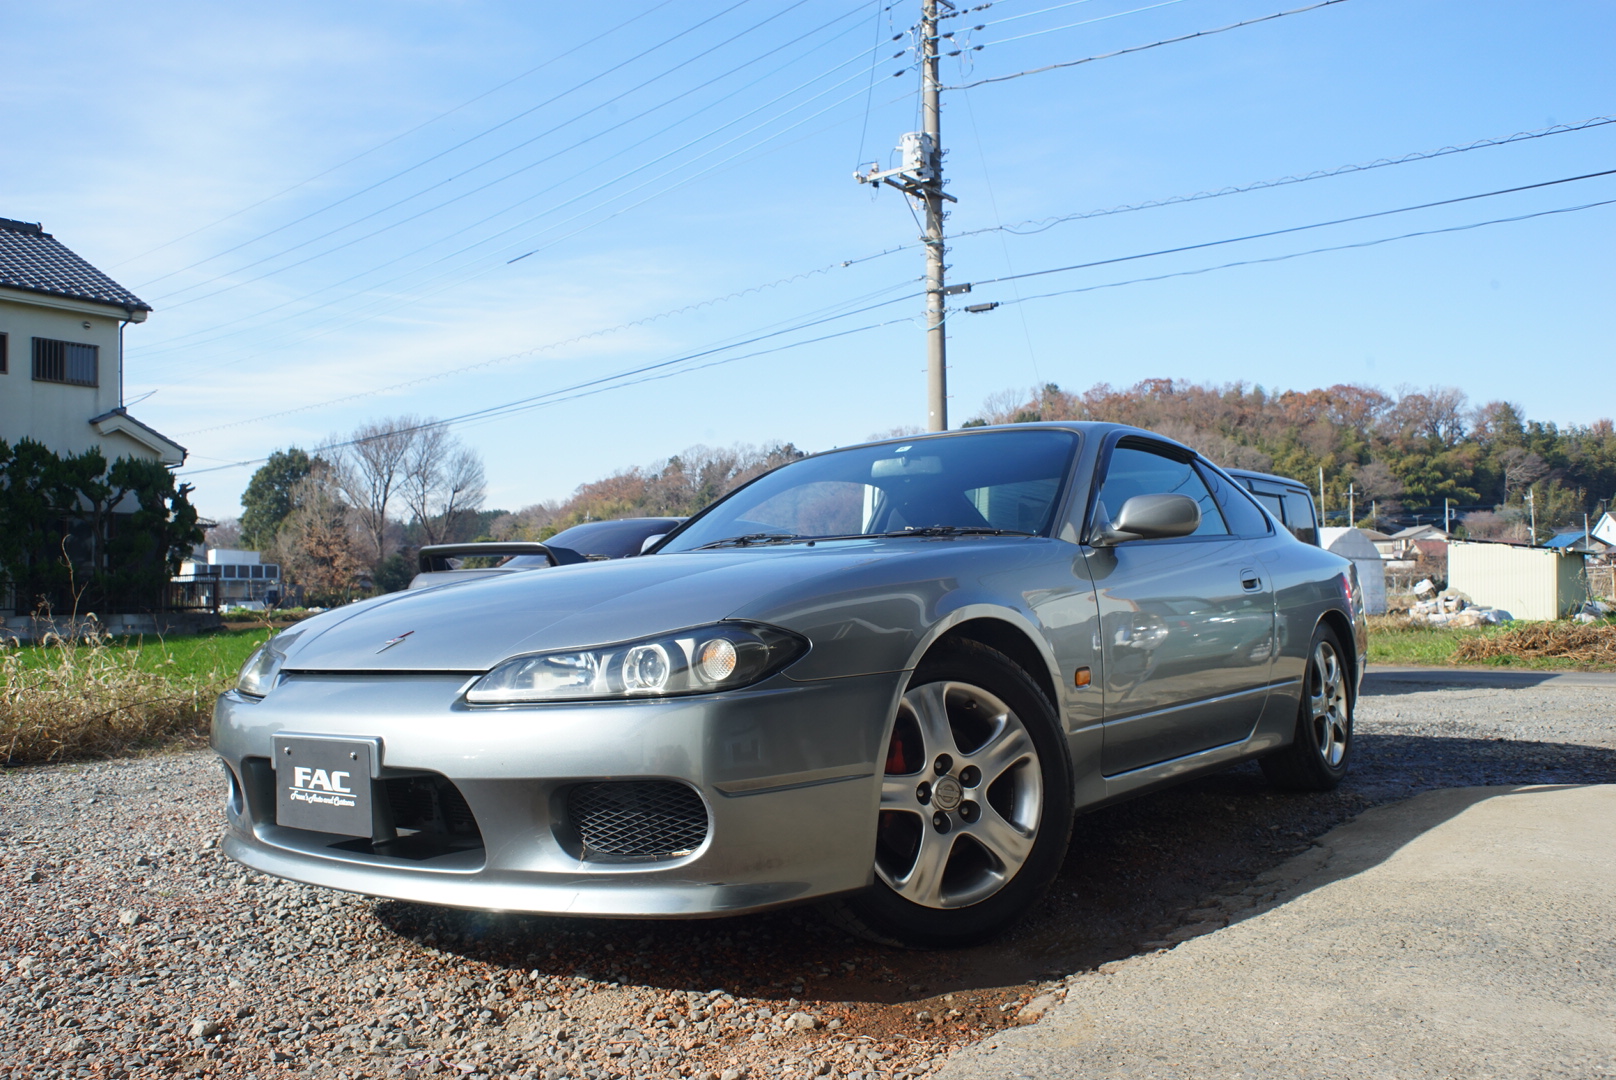 New Face ニッサン シルビア S15 オーテックver Freee S Auto And Customs